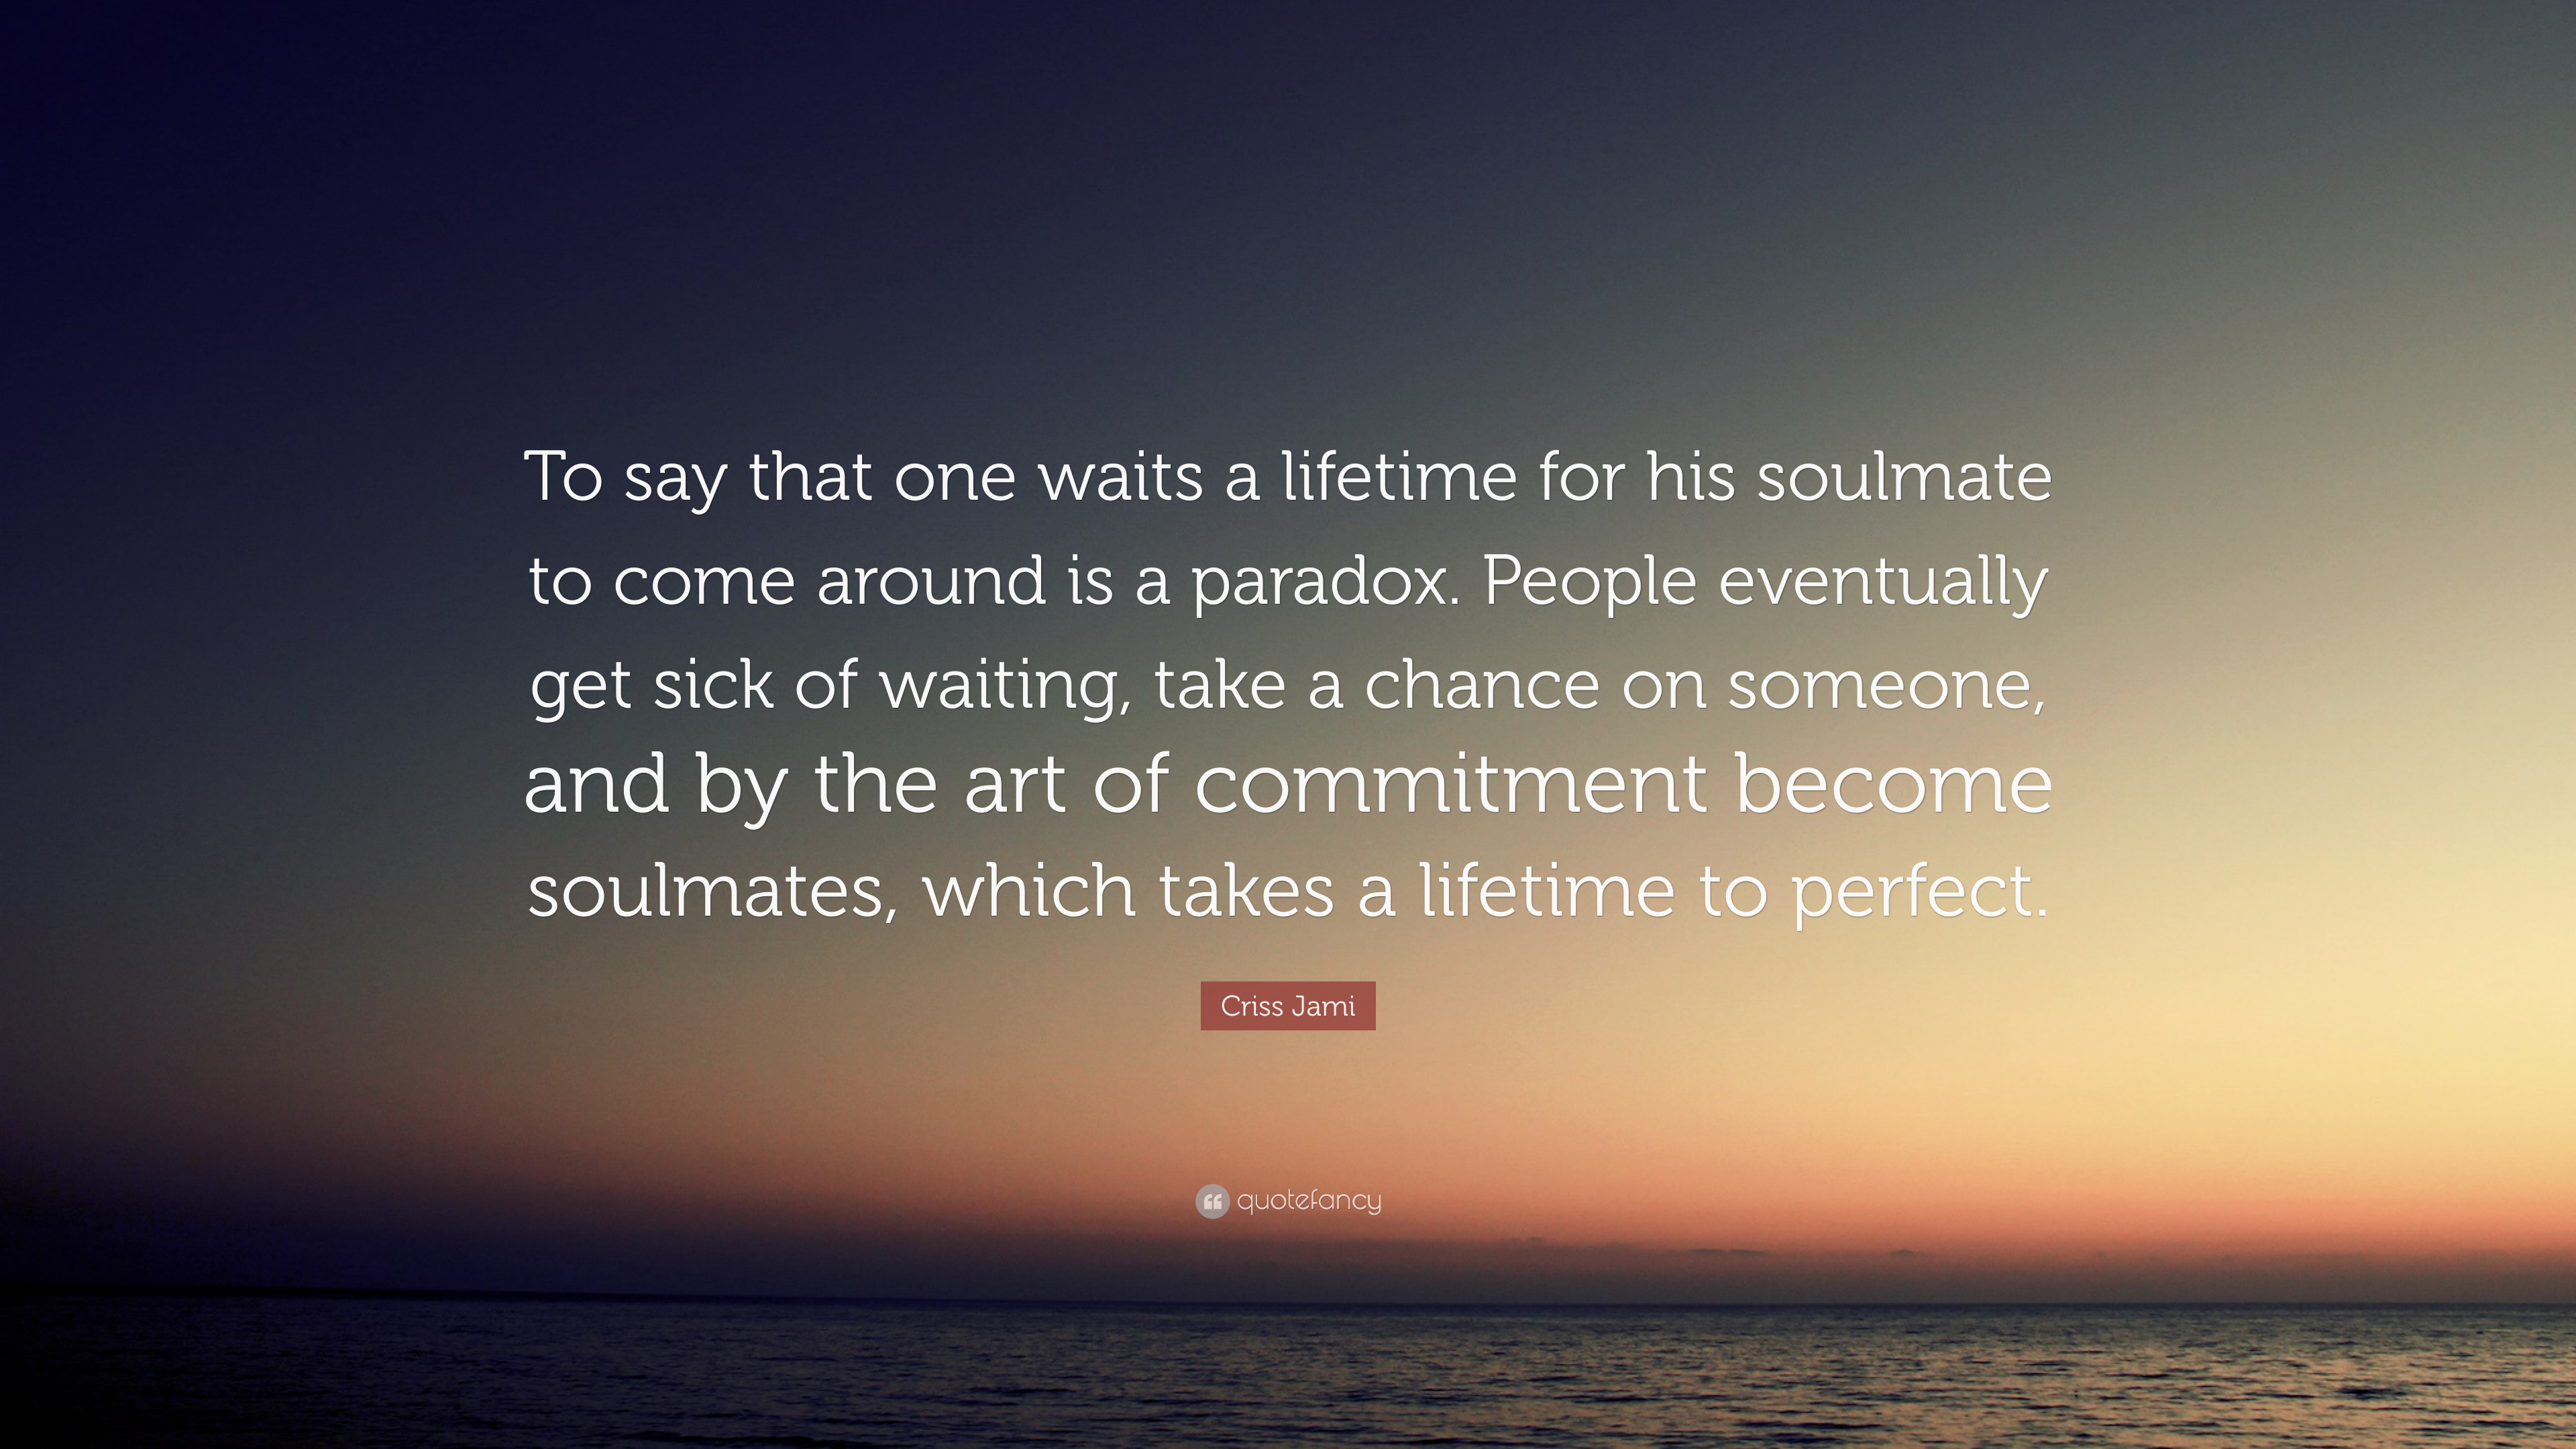 Criss Jami Quote: “To say that one waits a lifetime for his